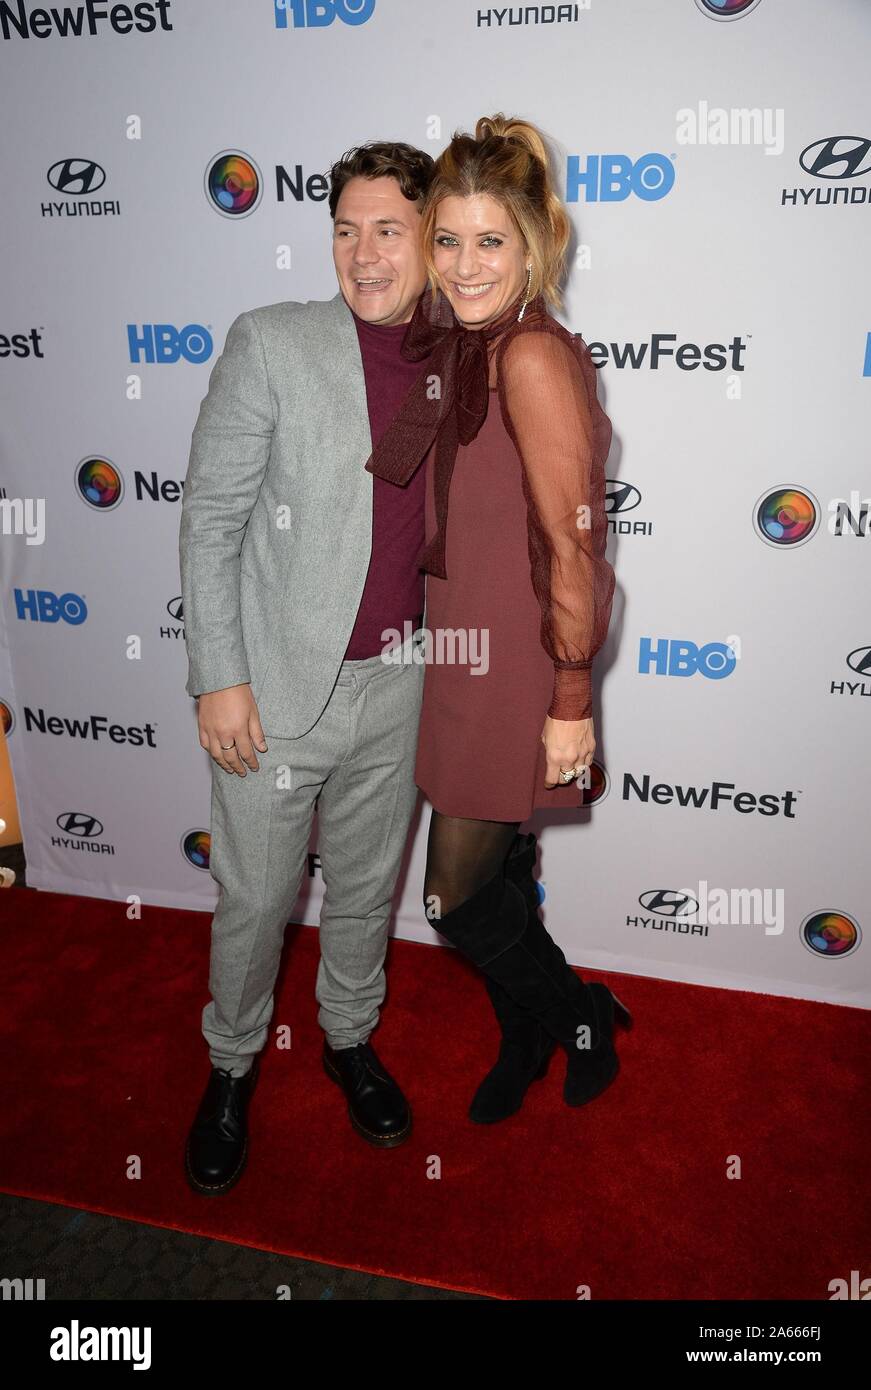 New York, NY, USA. 23rd Oct, 2019. Augustus Prew, Kate Walsh at arrivals for SELL BY Screening at NewFest 2019 Opening Night, SVA Theater, New York, NY October 23, 2019. Credit: Kristin Callahan/Everett Collection/Alamy Live News Stock Photo